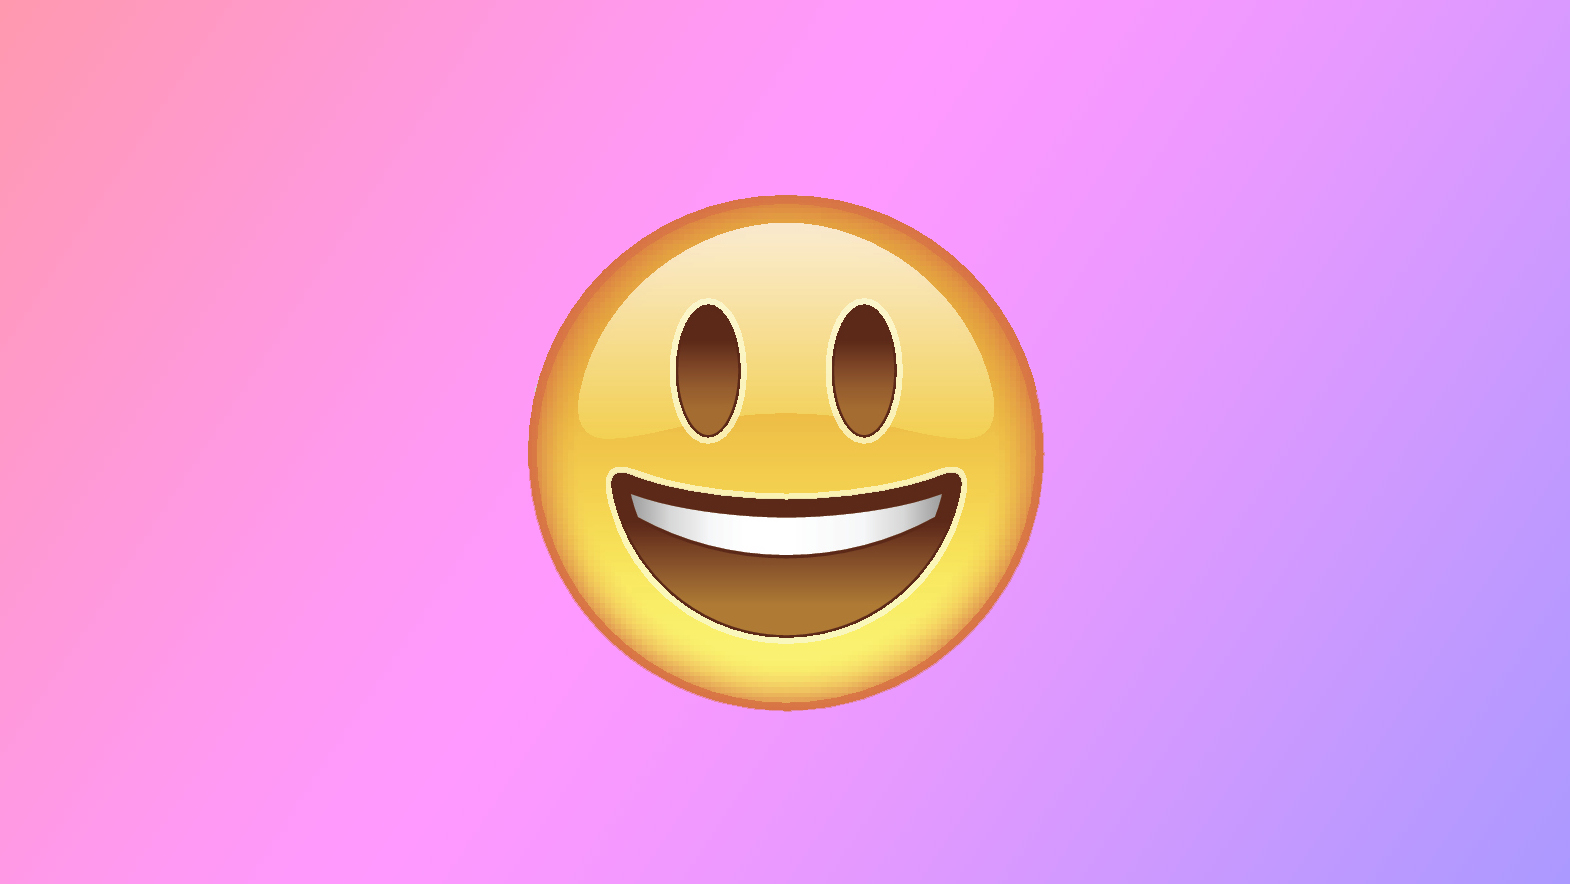 guess the emoji smiley and end